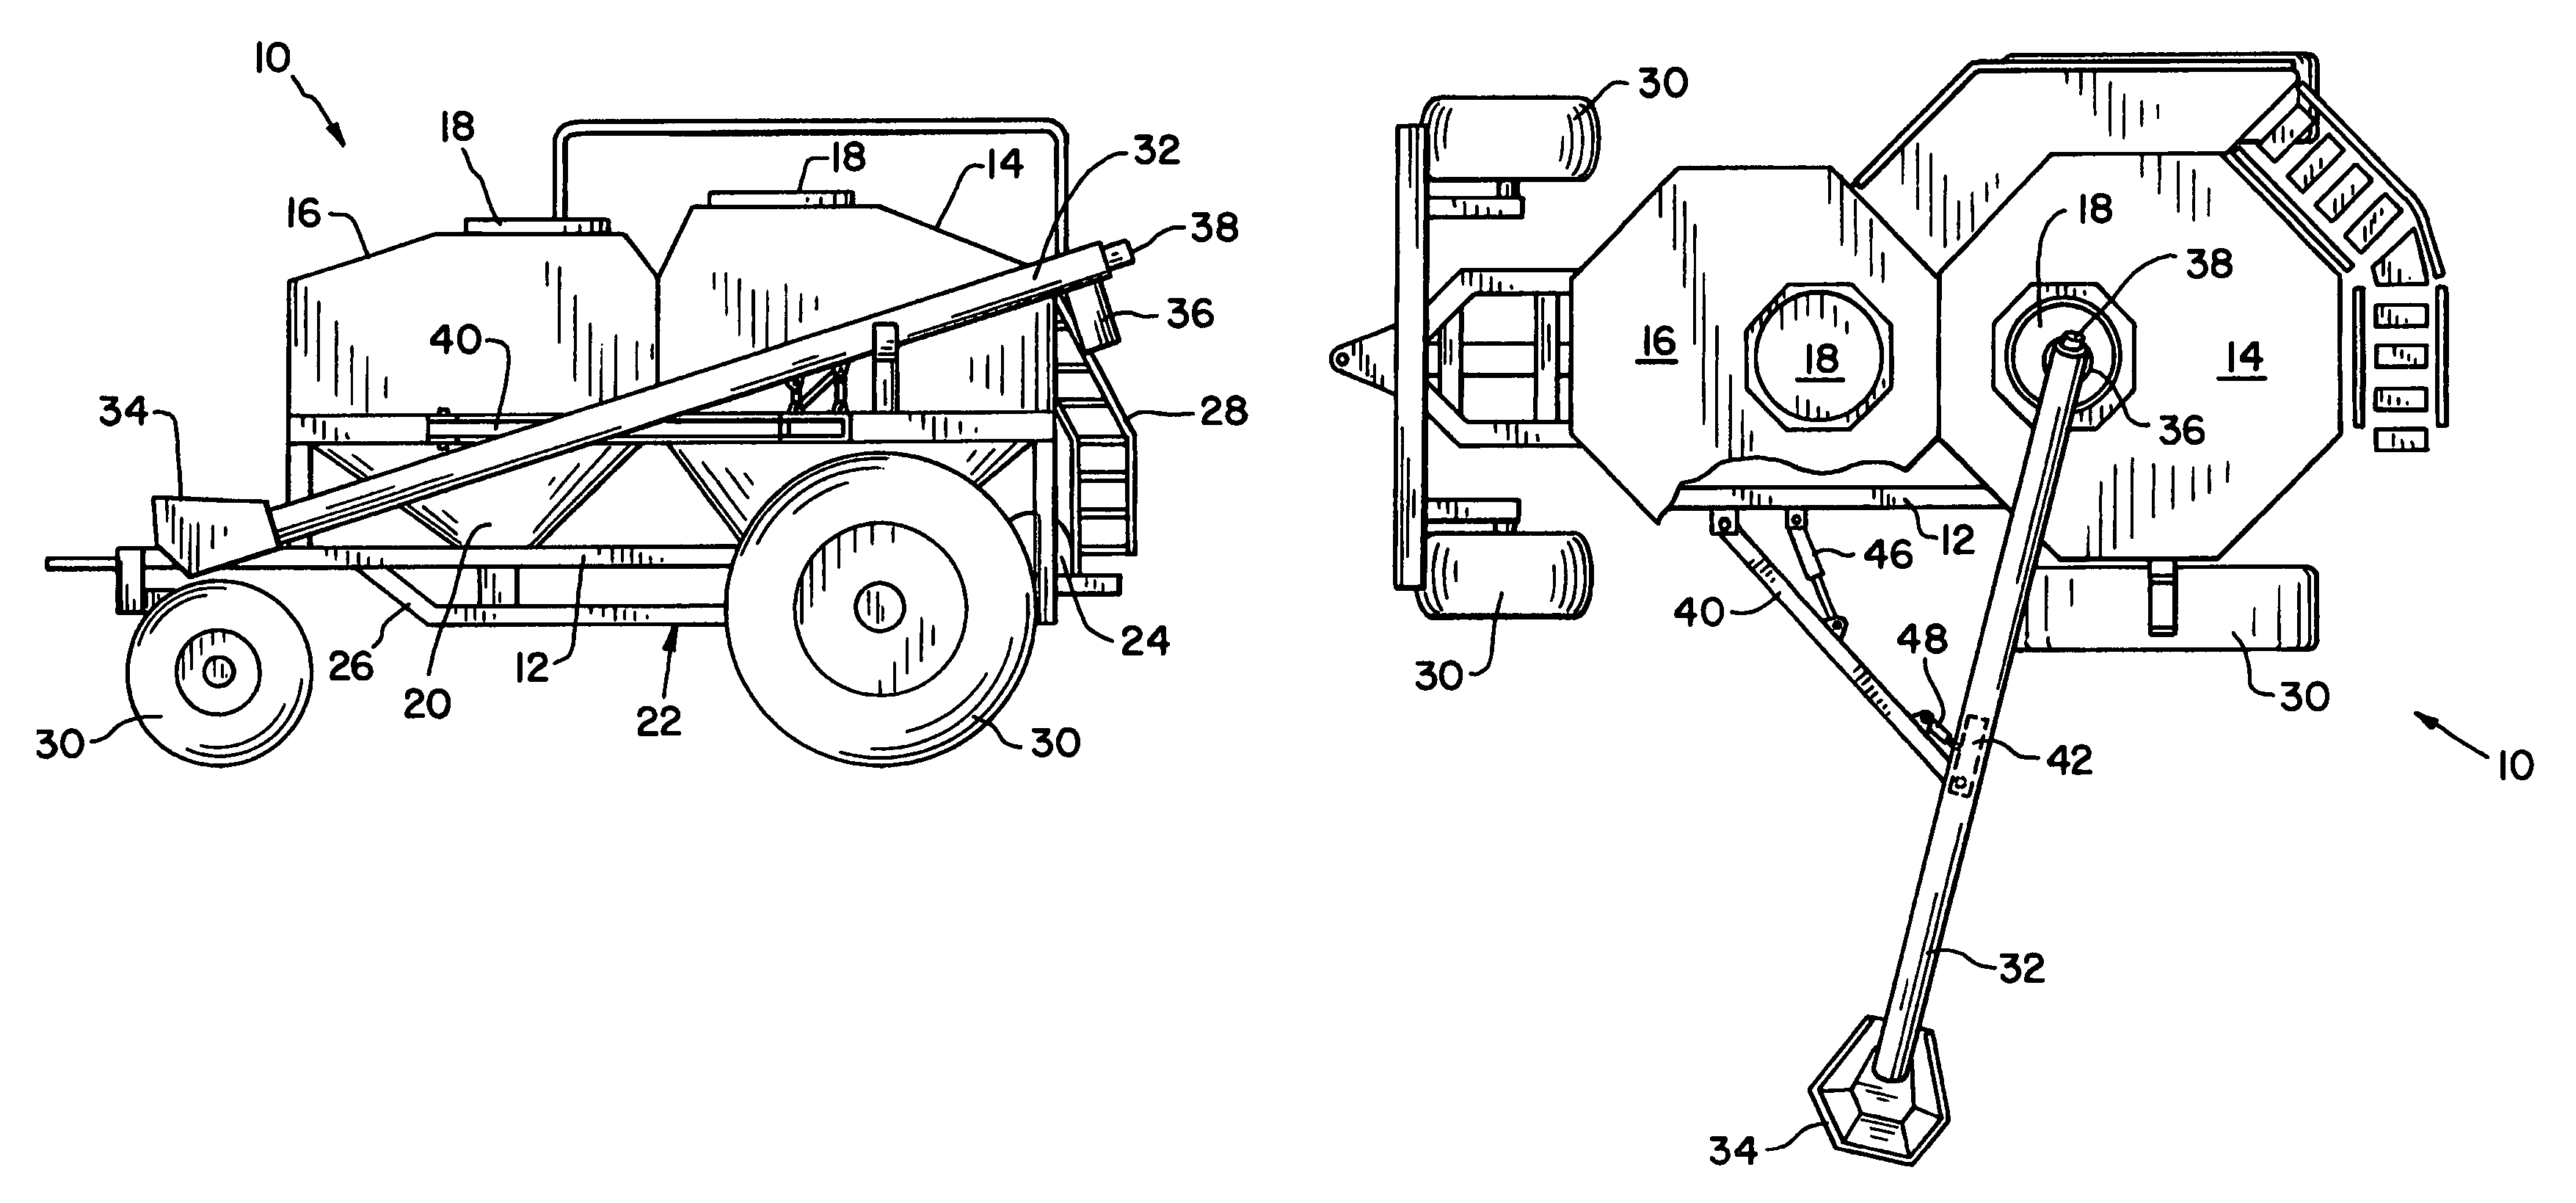 Conveyor positioning system for an air cart in an agricultural seeder